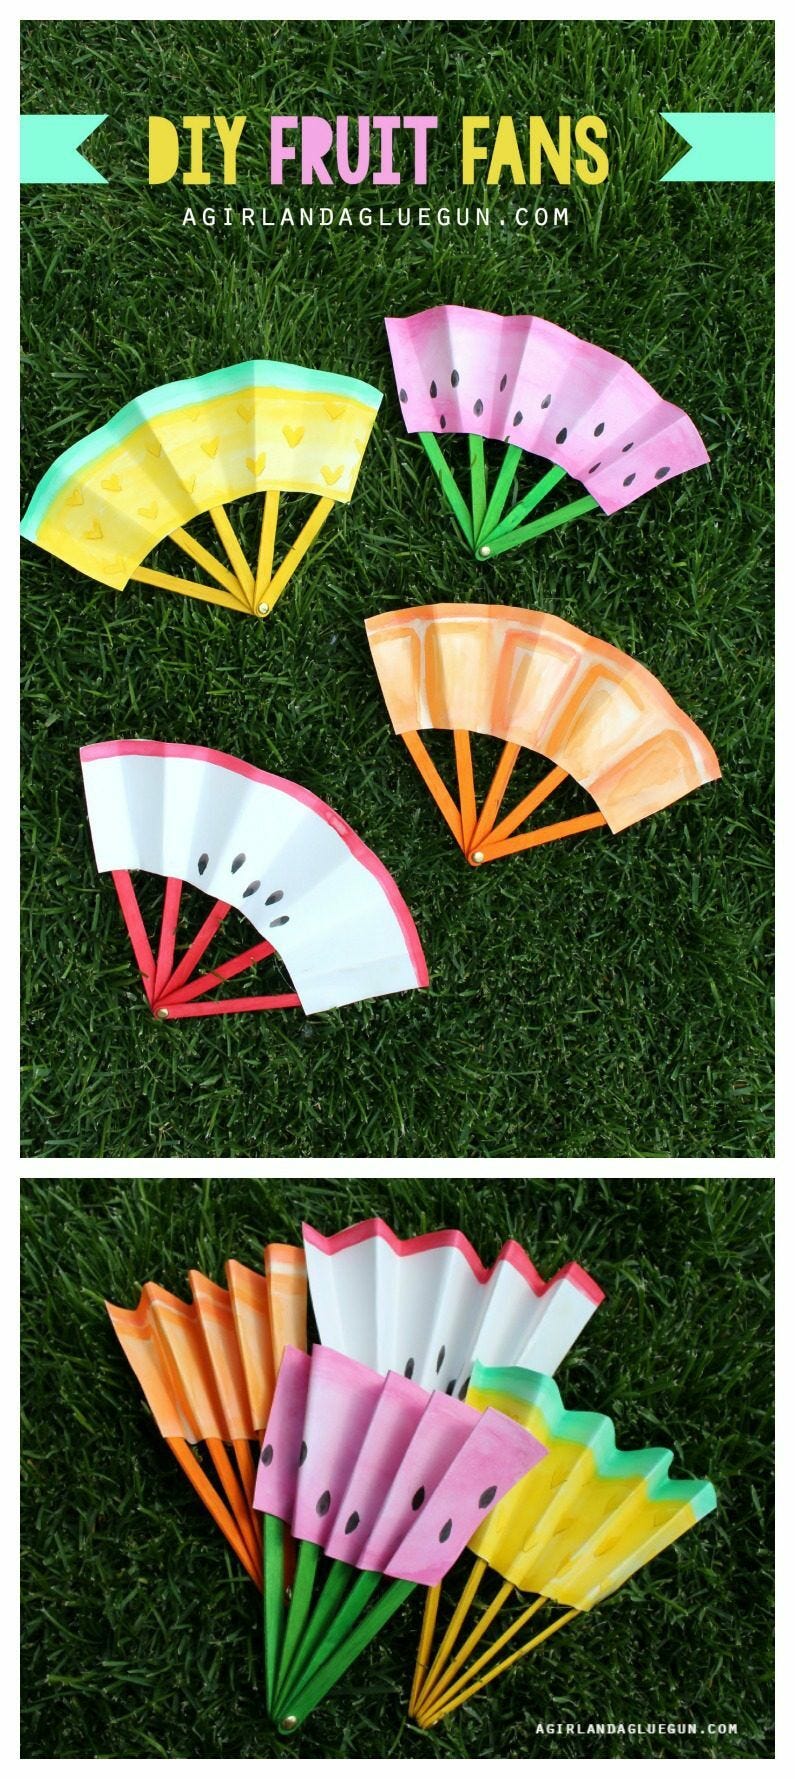 summer fun colorful diy fruit inspired paper folding fans on grass